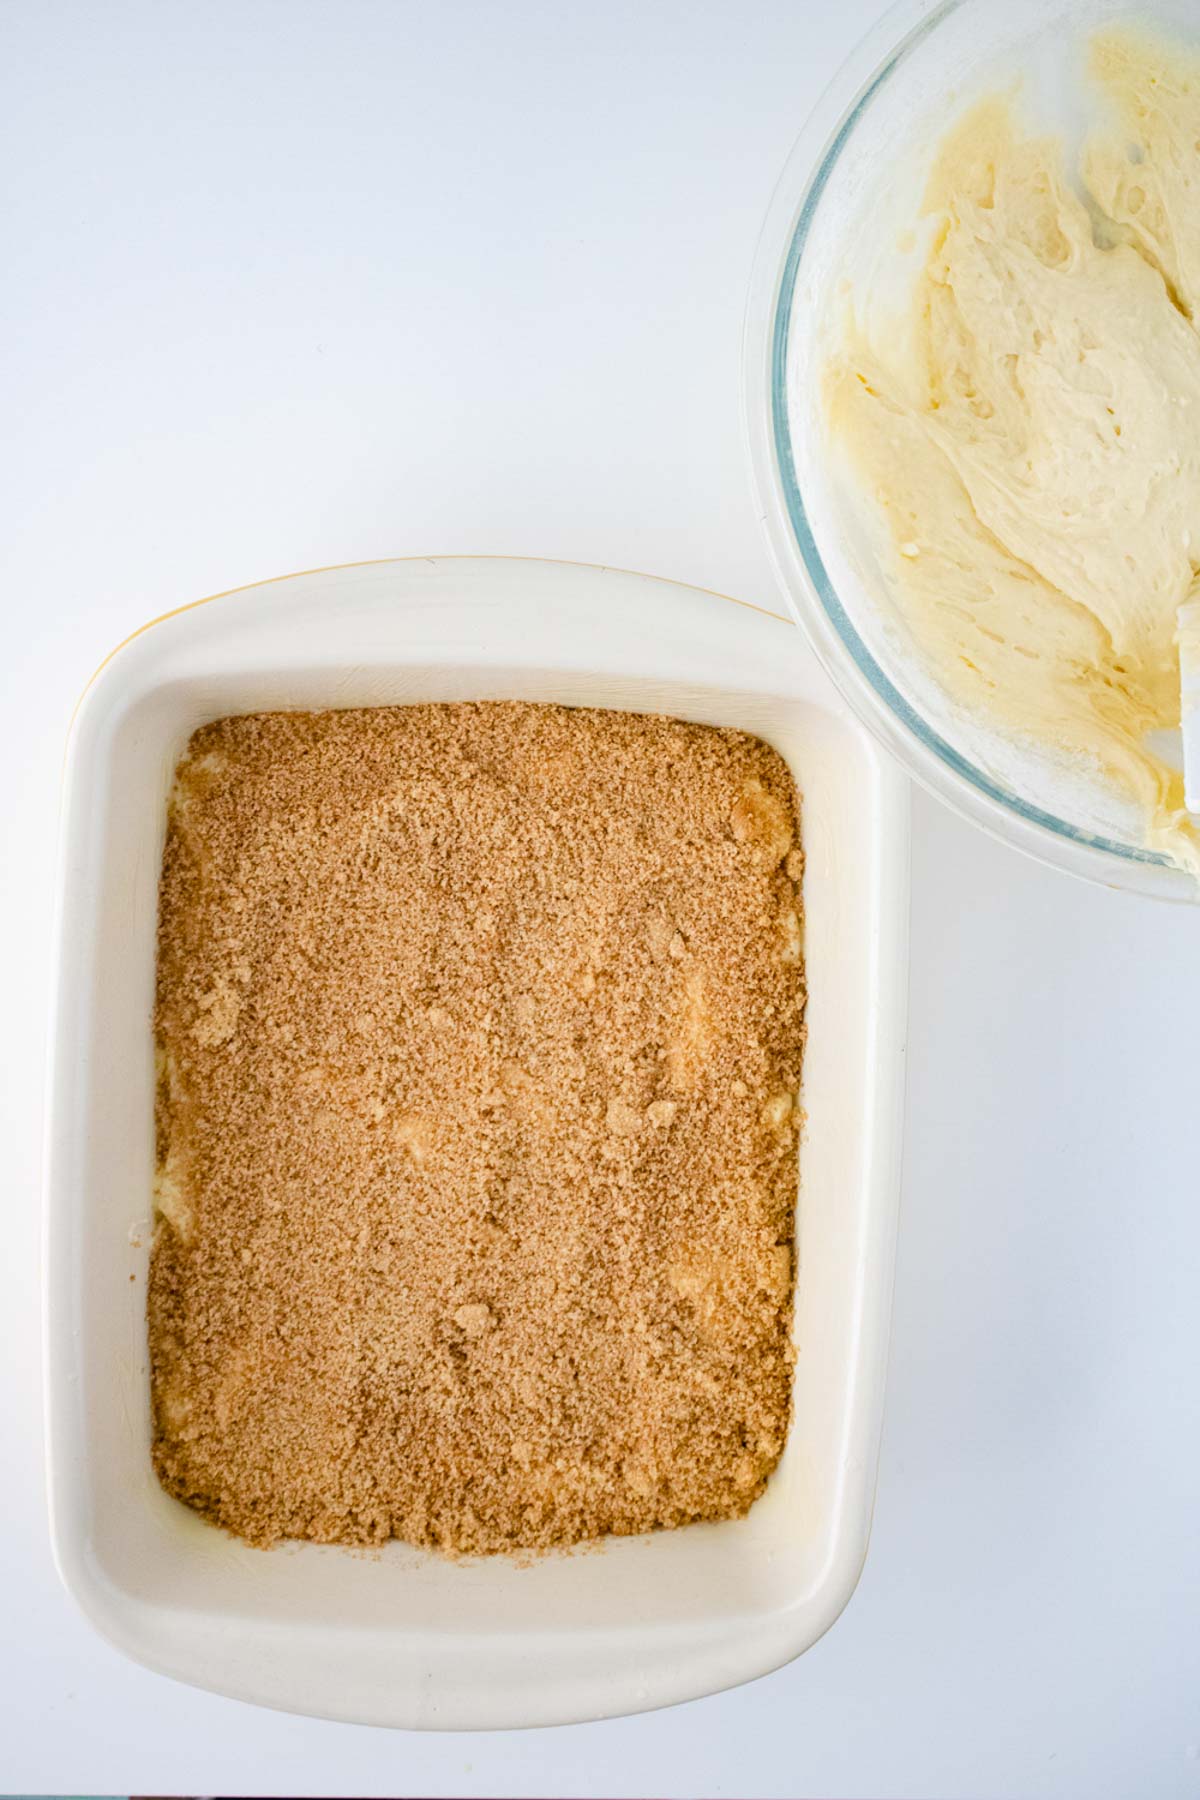 A square baking dish filled with a crumbly brown sugar mixture beside a glass bowl containing honey bun cake batter.